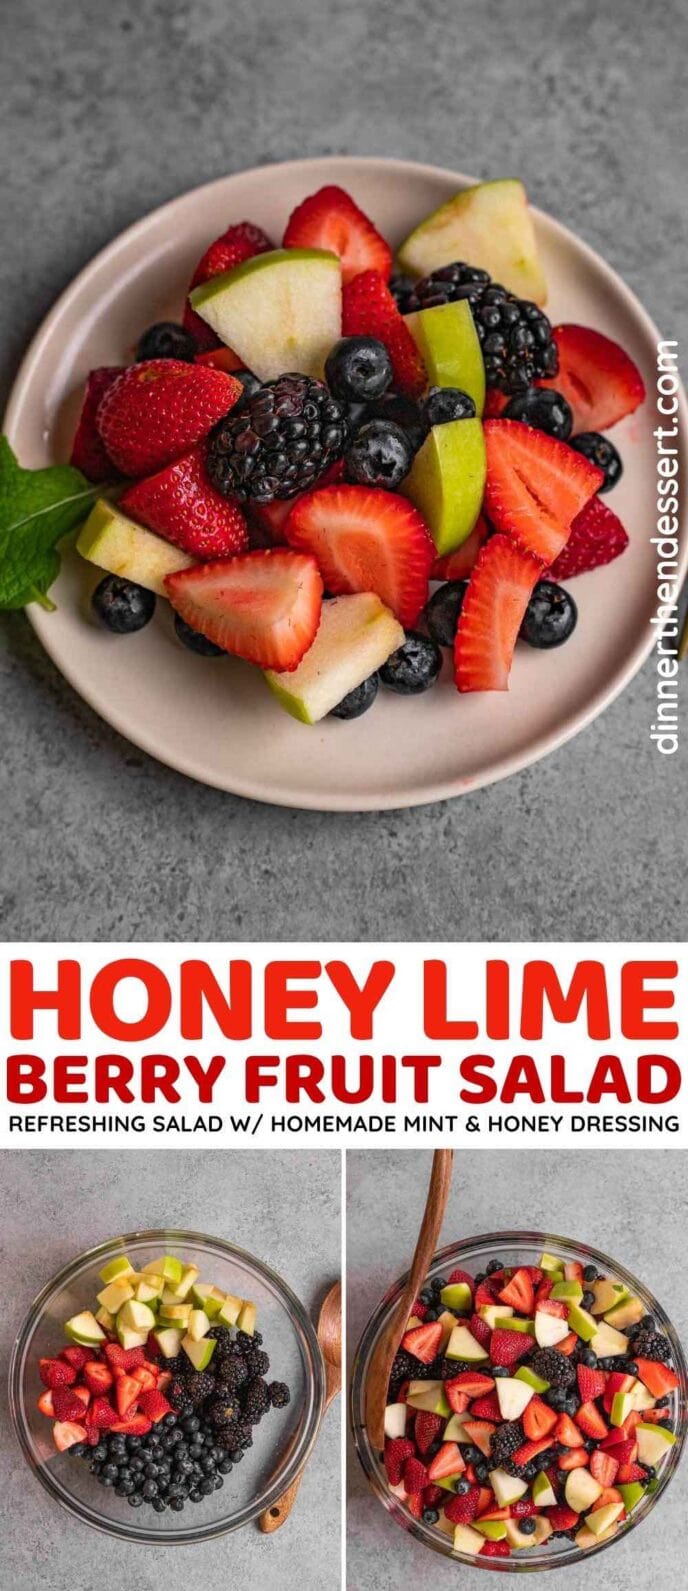 Honey Lime Berry Fruit Salad collage